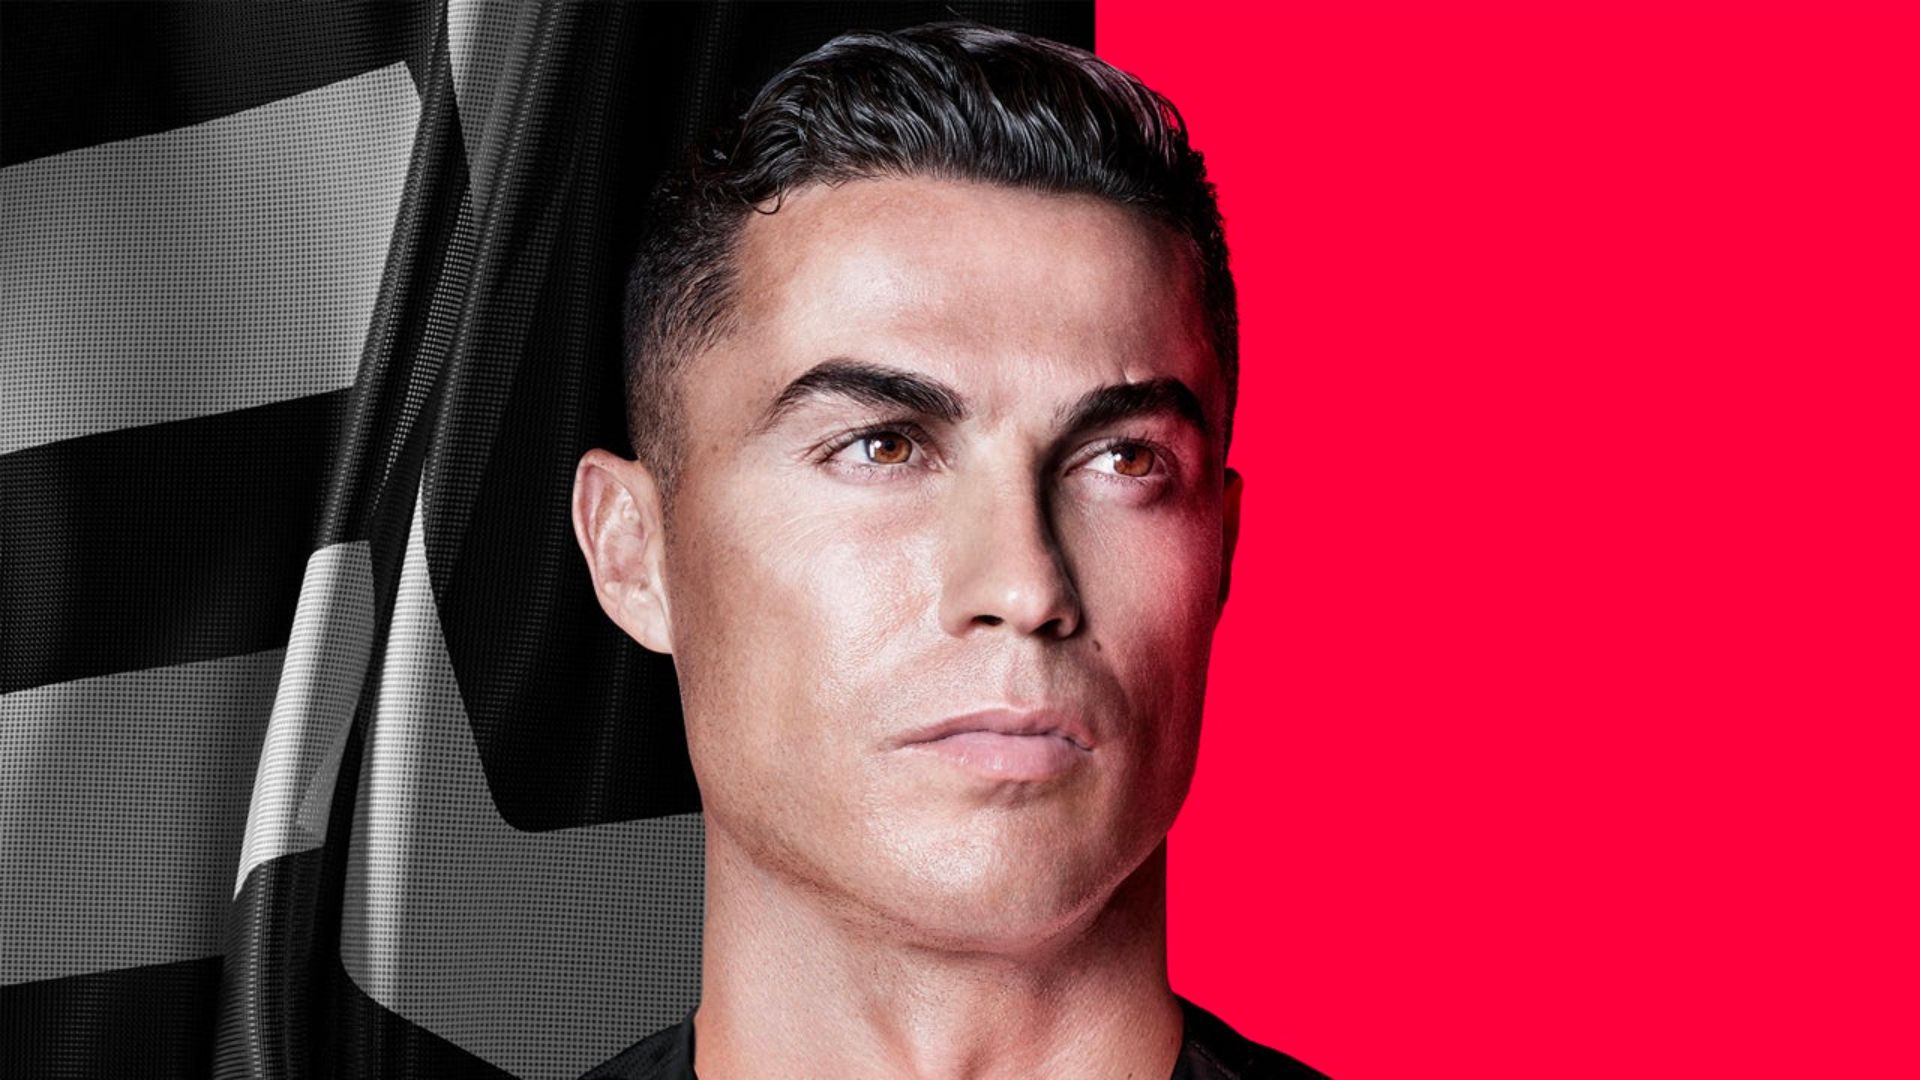 UFL Receives $40M Including an Investment from Cristiano Ronaldo